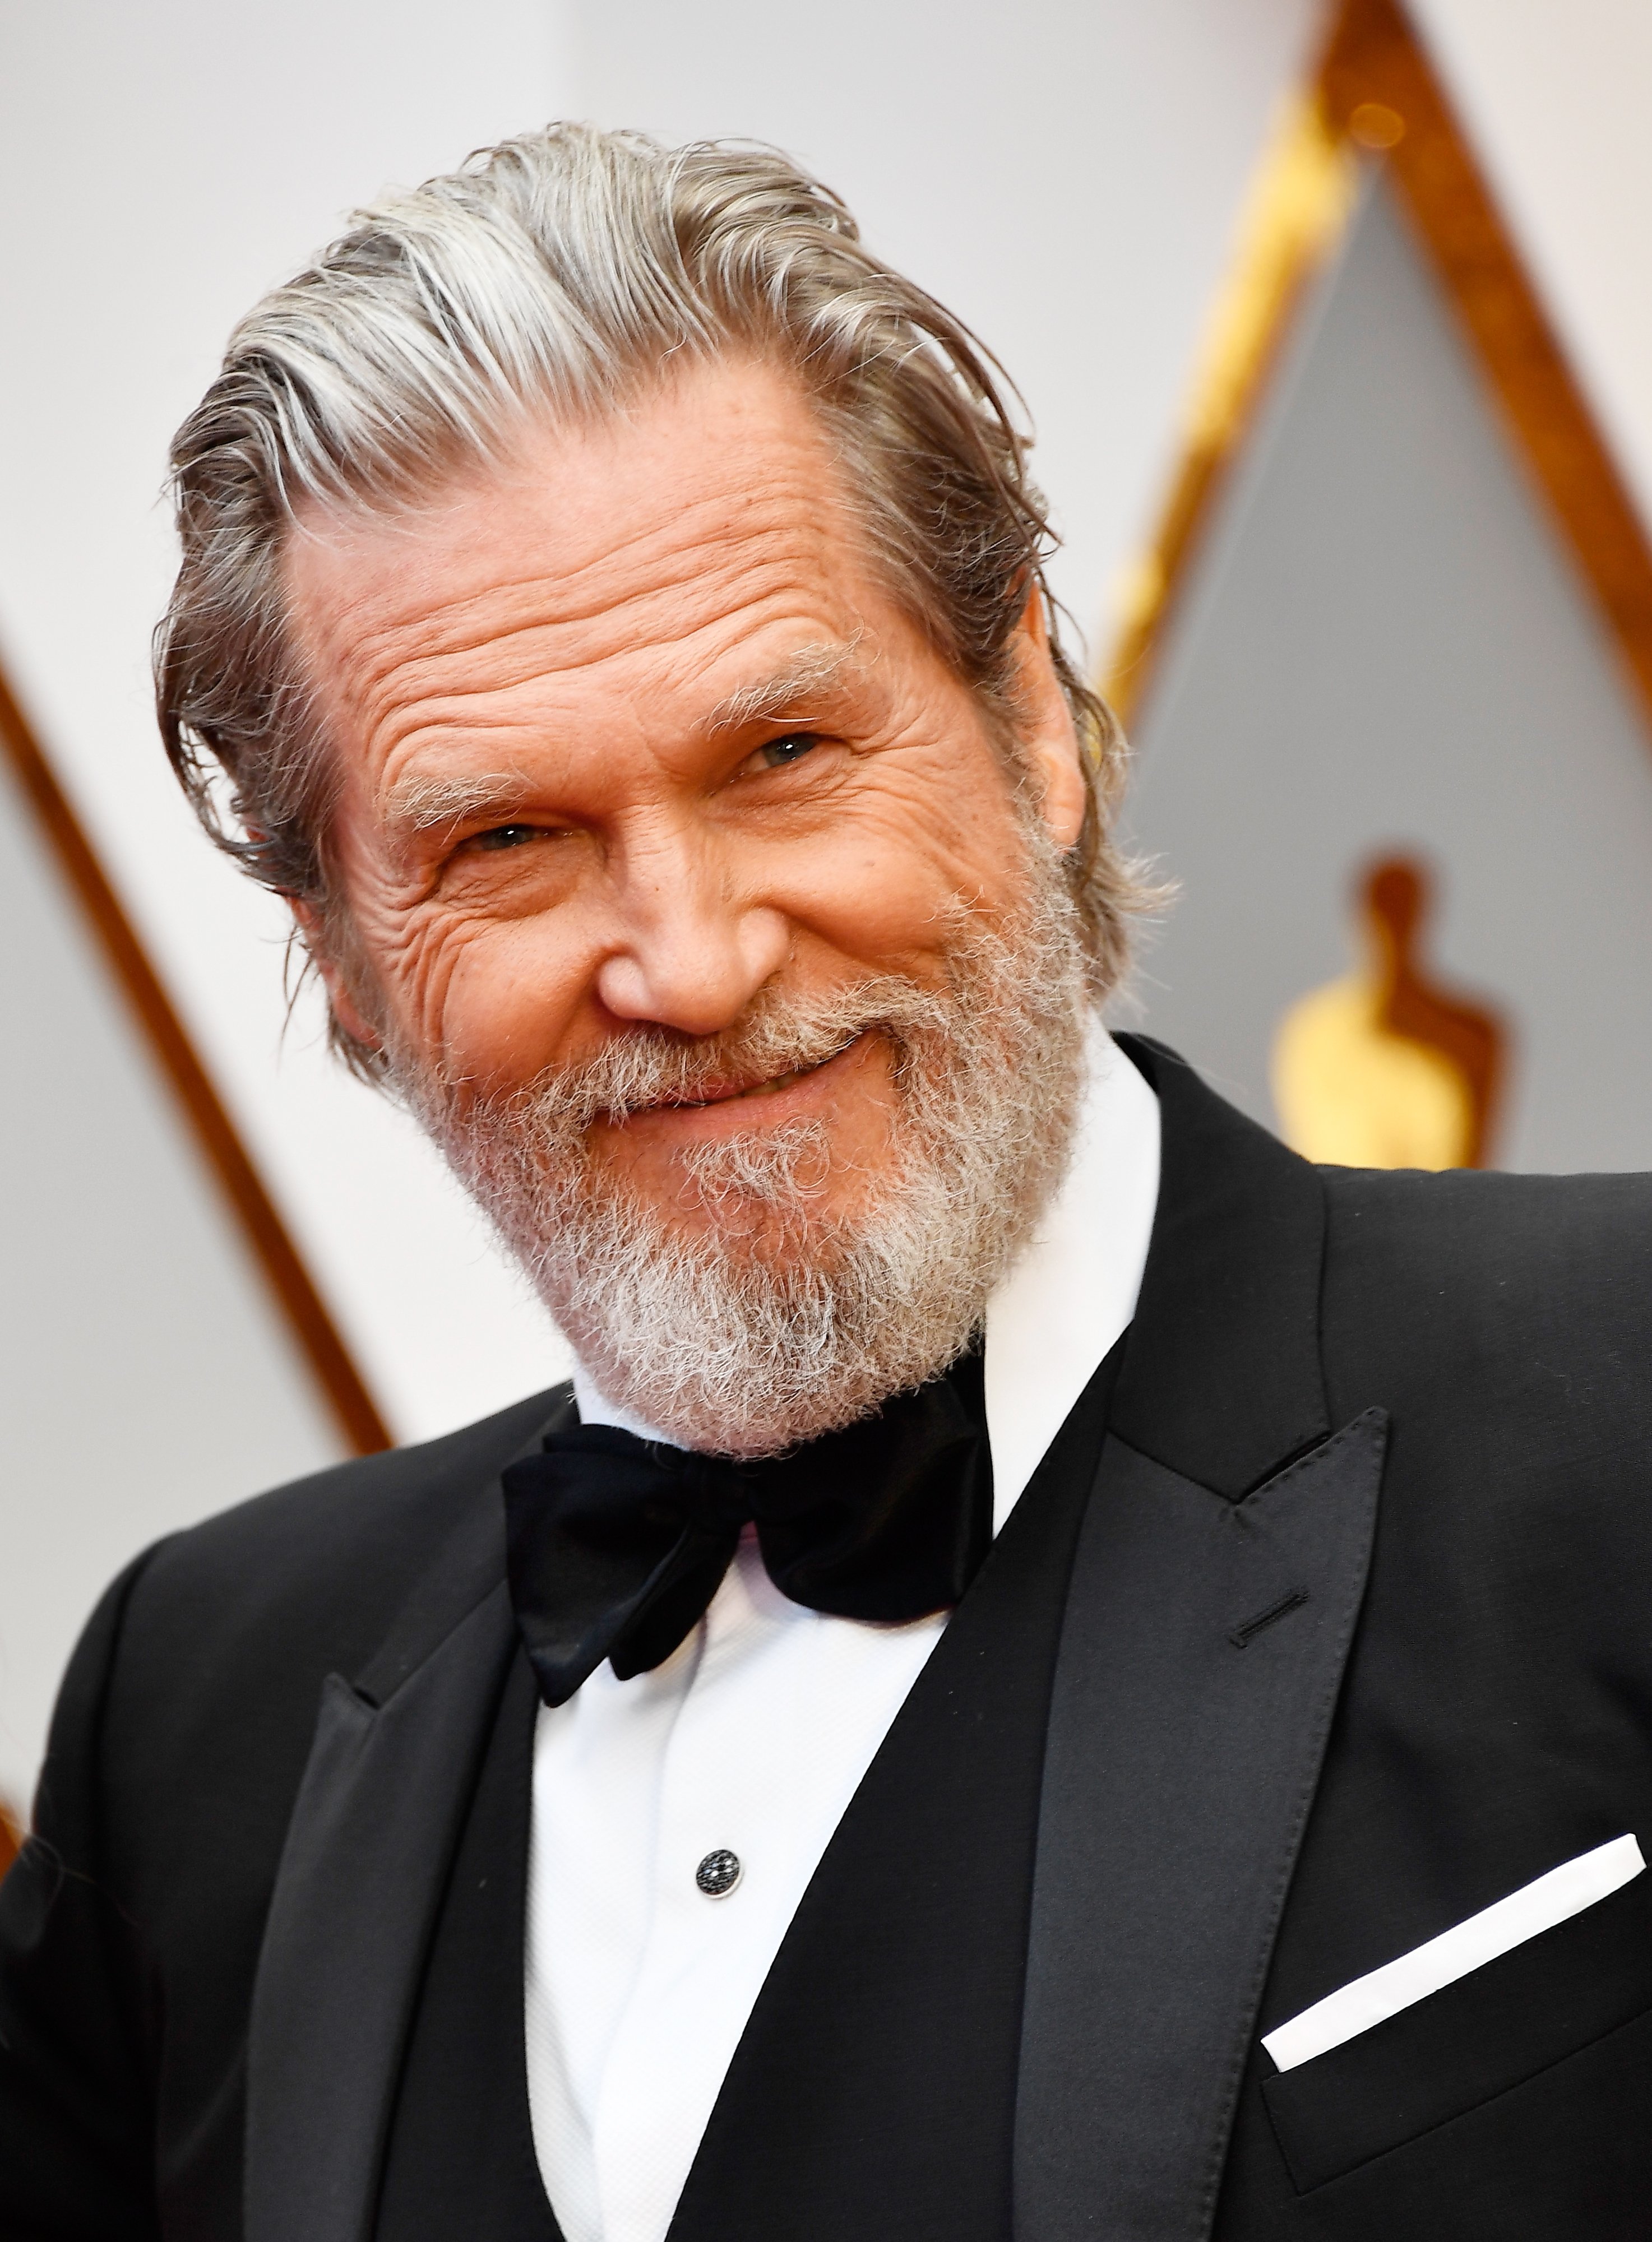 Jeff Bridges attends the 89th Annual Academy Awards at Hollywood & Highland Center on February 26, 2017 in Hollywood, California | Photo: Getty Images